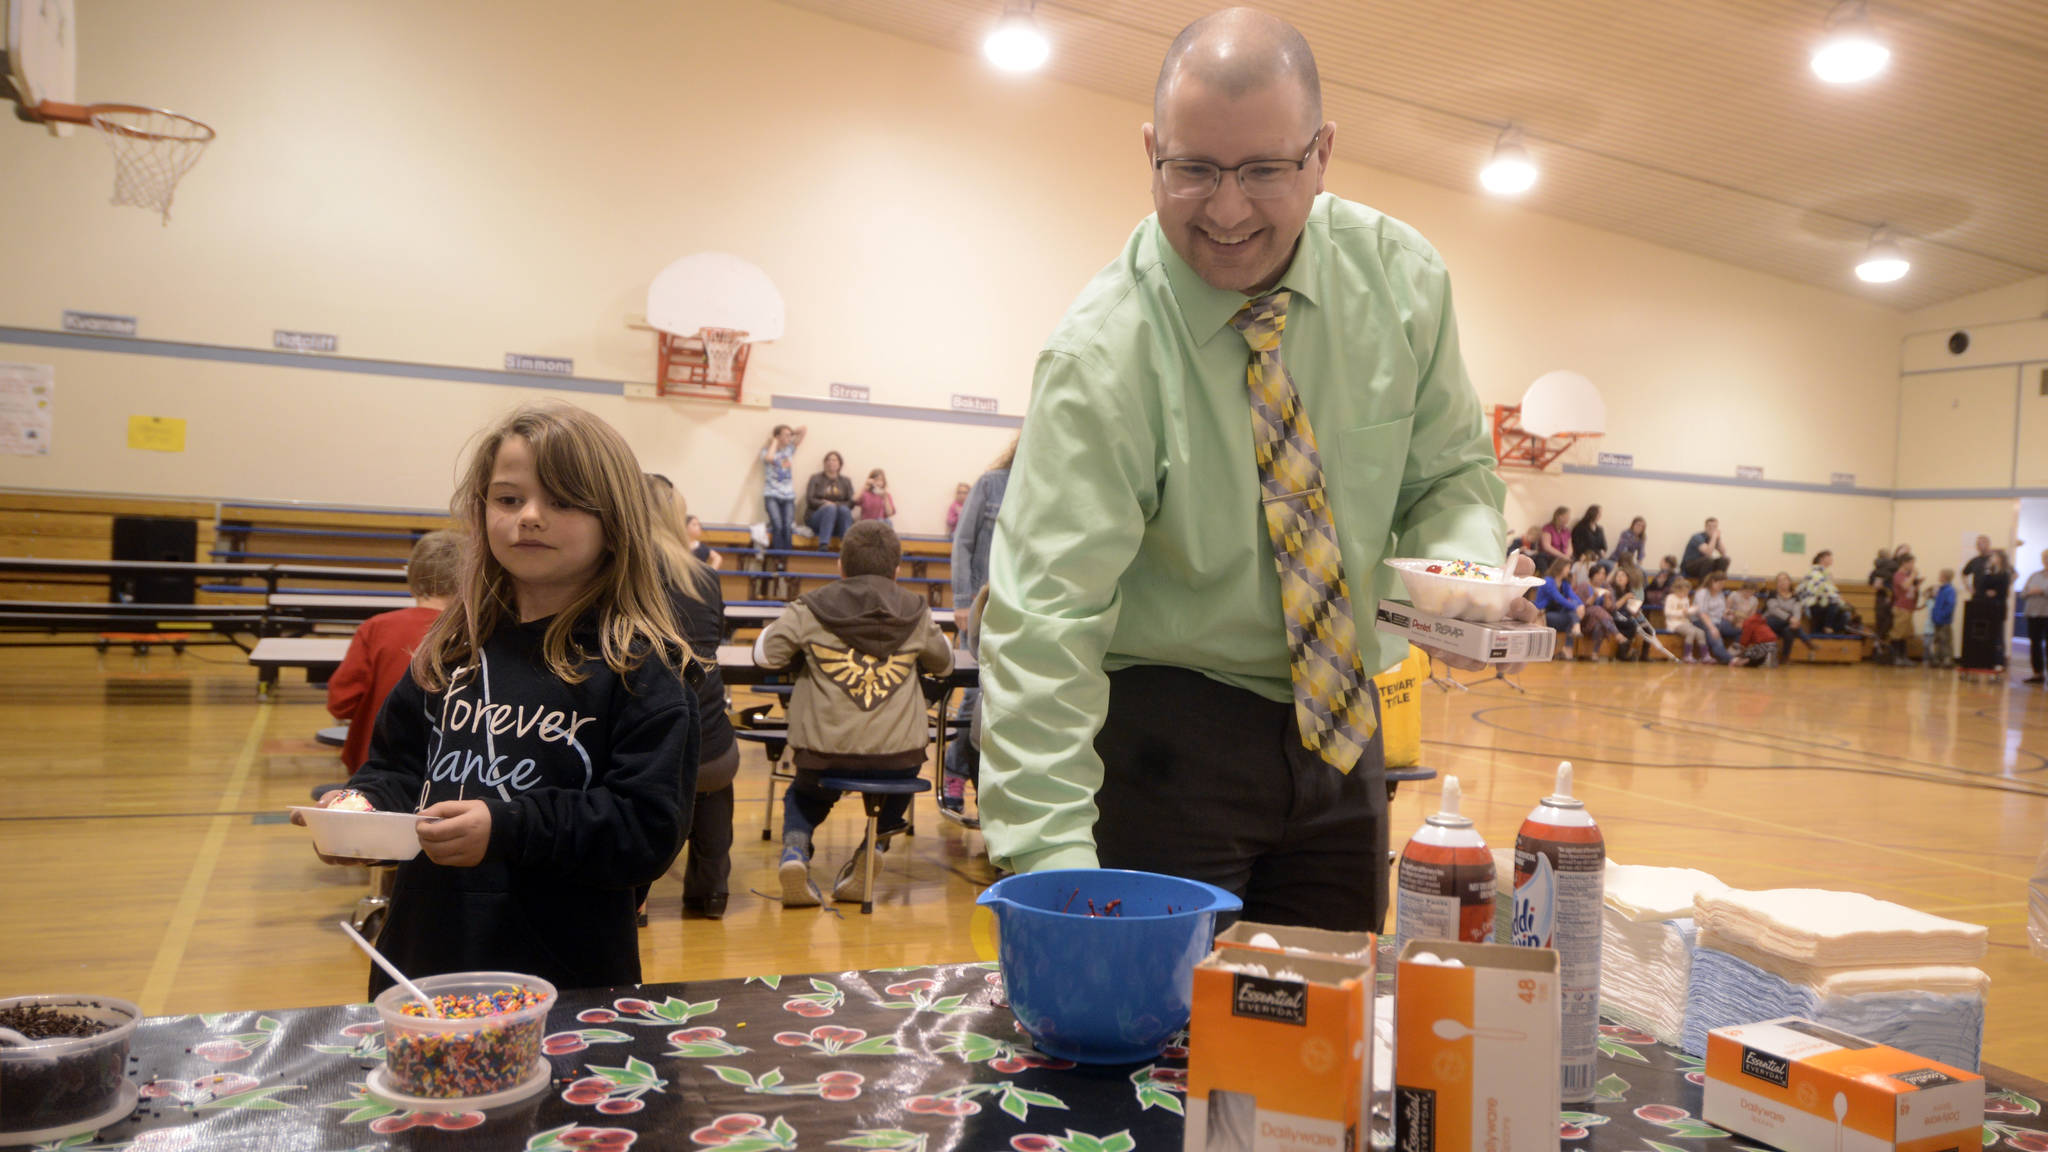 First-grader Shea Linton, left, joined Soldotna Montessori Charter School’s new principal John DeVolld at an ice cream social event on Tuesday night at the school. The event was organized by the school’s PTO to welcome DeVolld as the new principal for the upcoming school year. (Kat Sorensen/Peninsula Clarion)